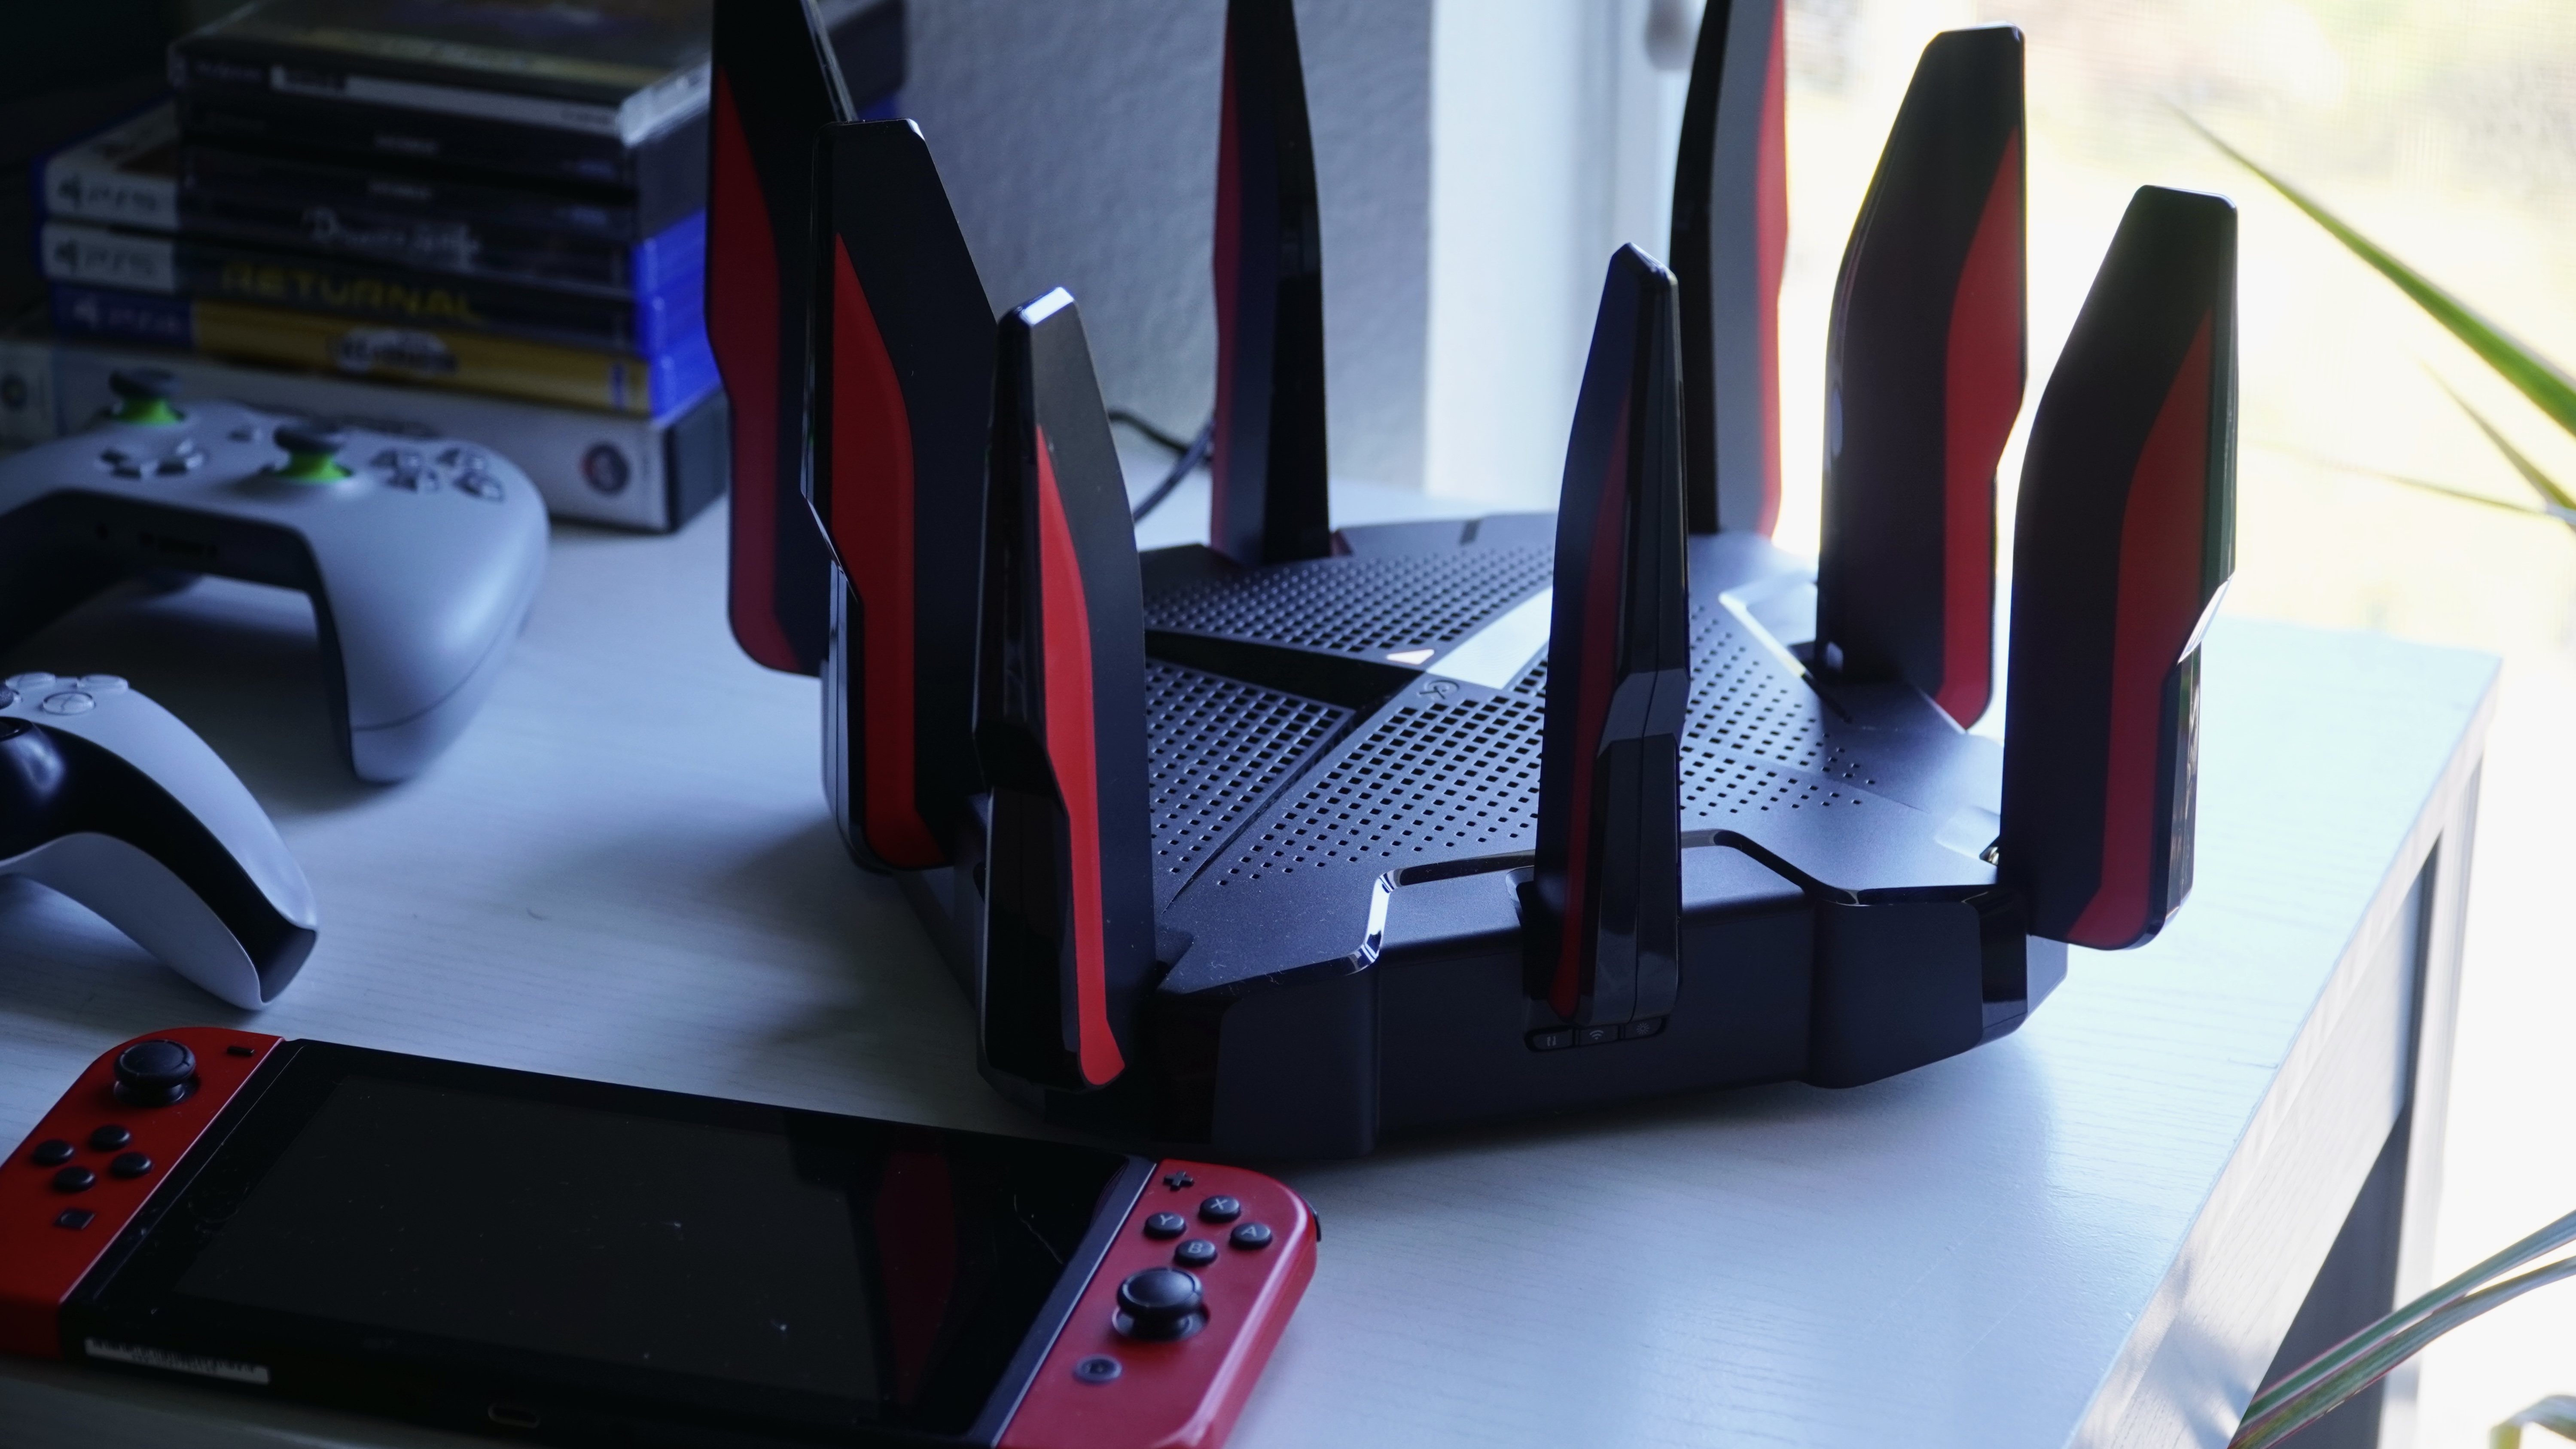 TP-Link Archer GX90 gaming router